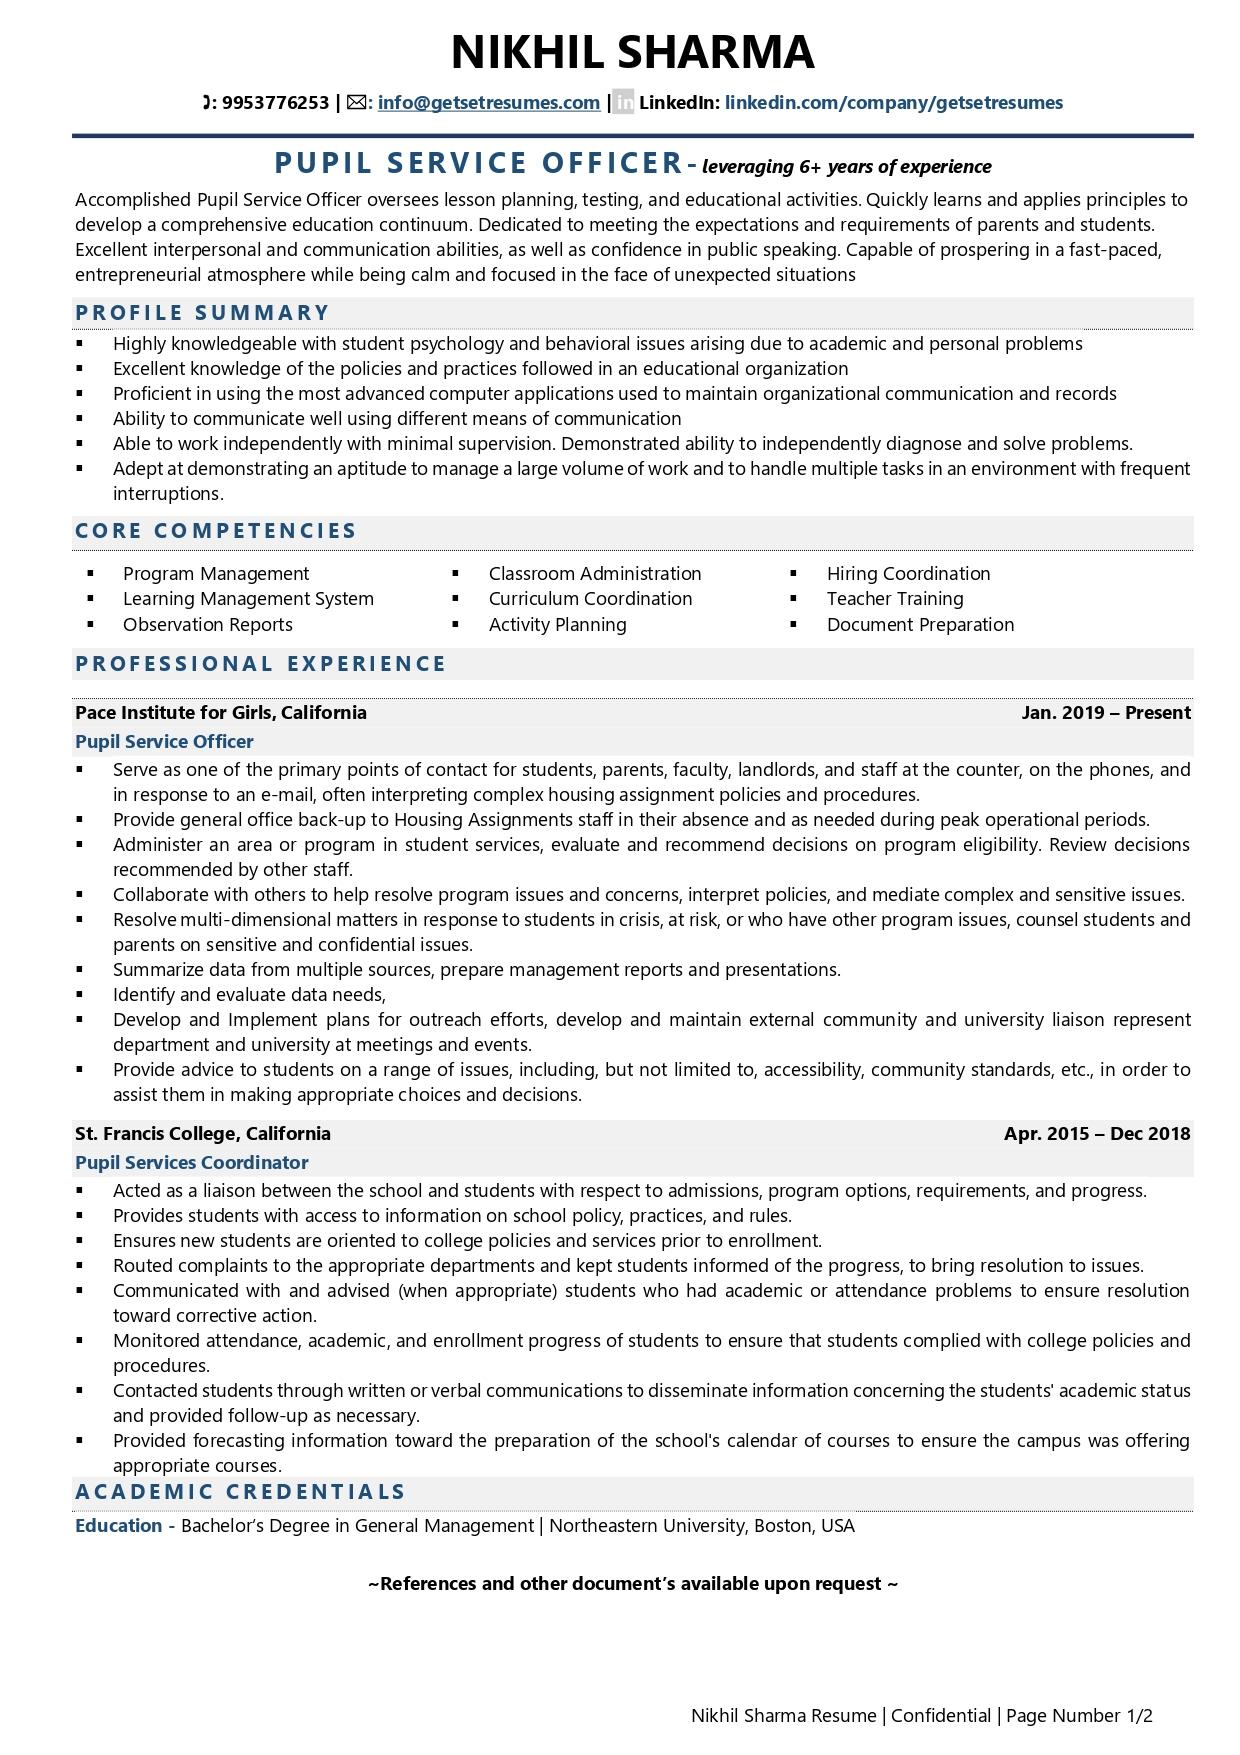 Pupil Services Officer - Resume Example & Template